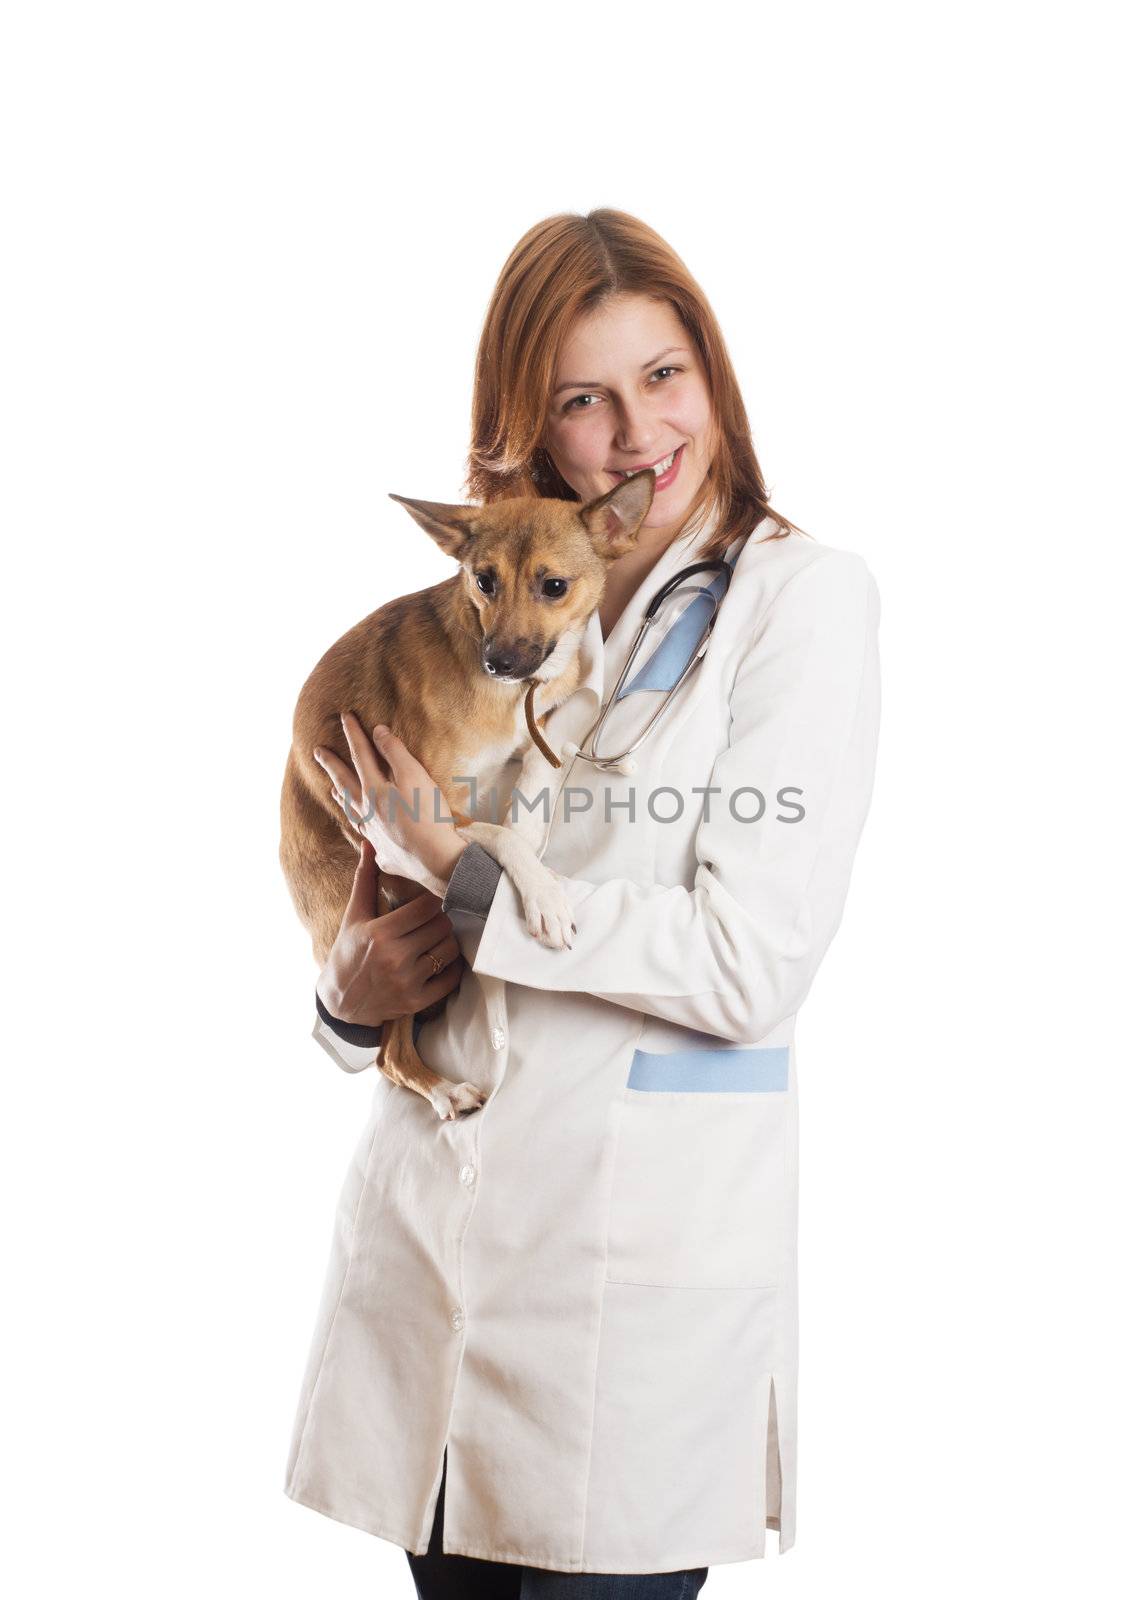 young woman veterinarian holding a puppy on a white background isolated